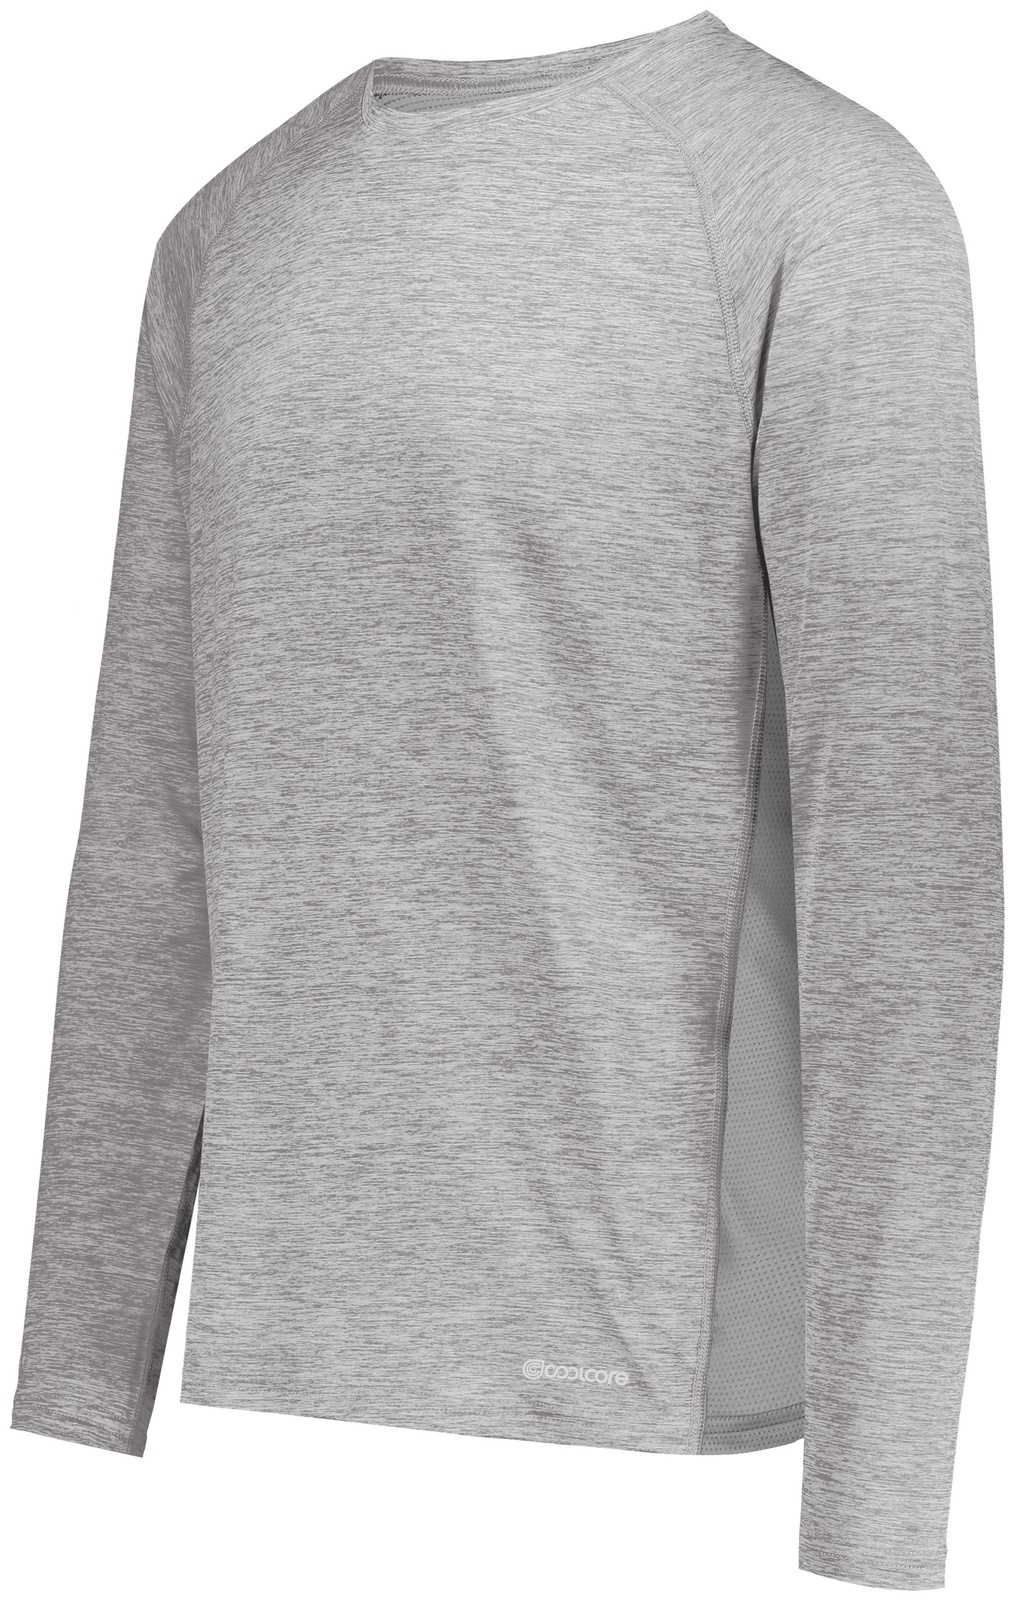 Holloway 222570 Electrify CoolCore Long Sleeve T-Shirt - Athletic Gray Heather - HIT a Double